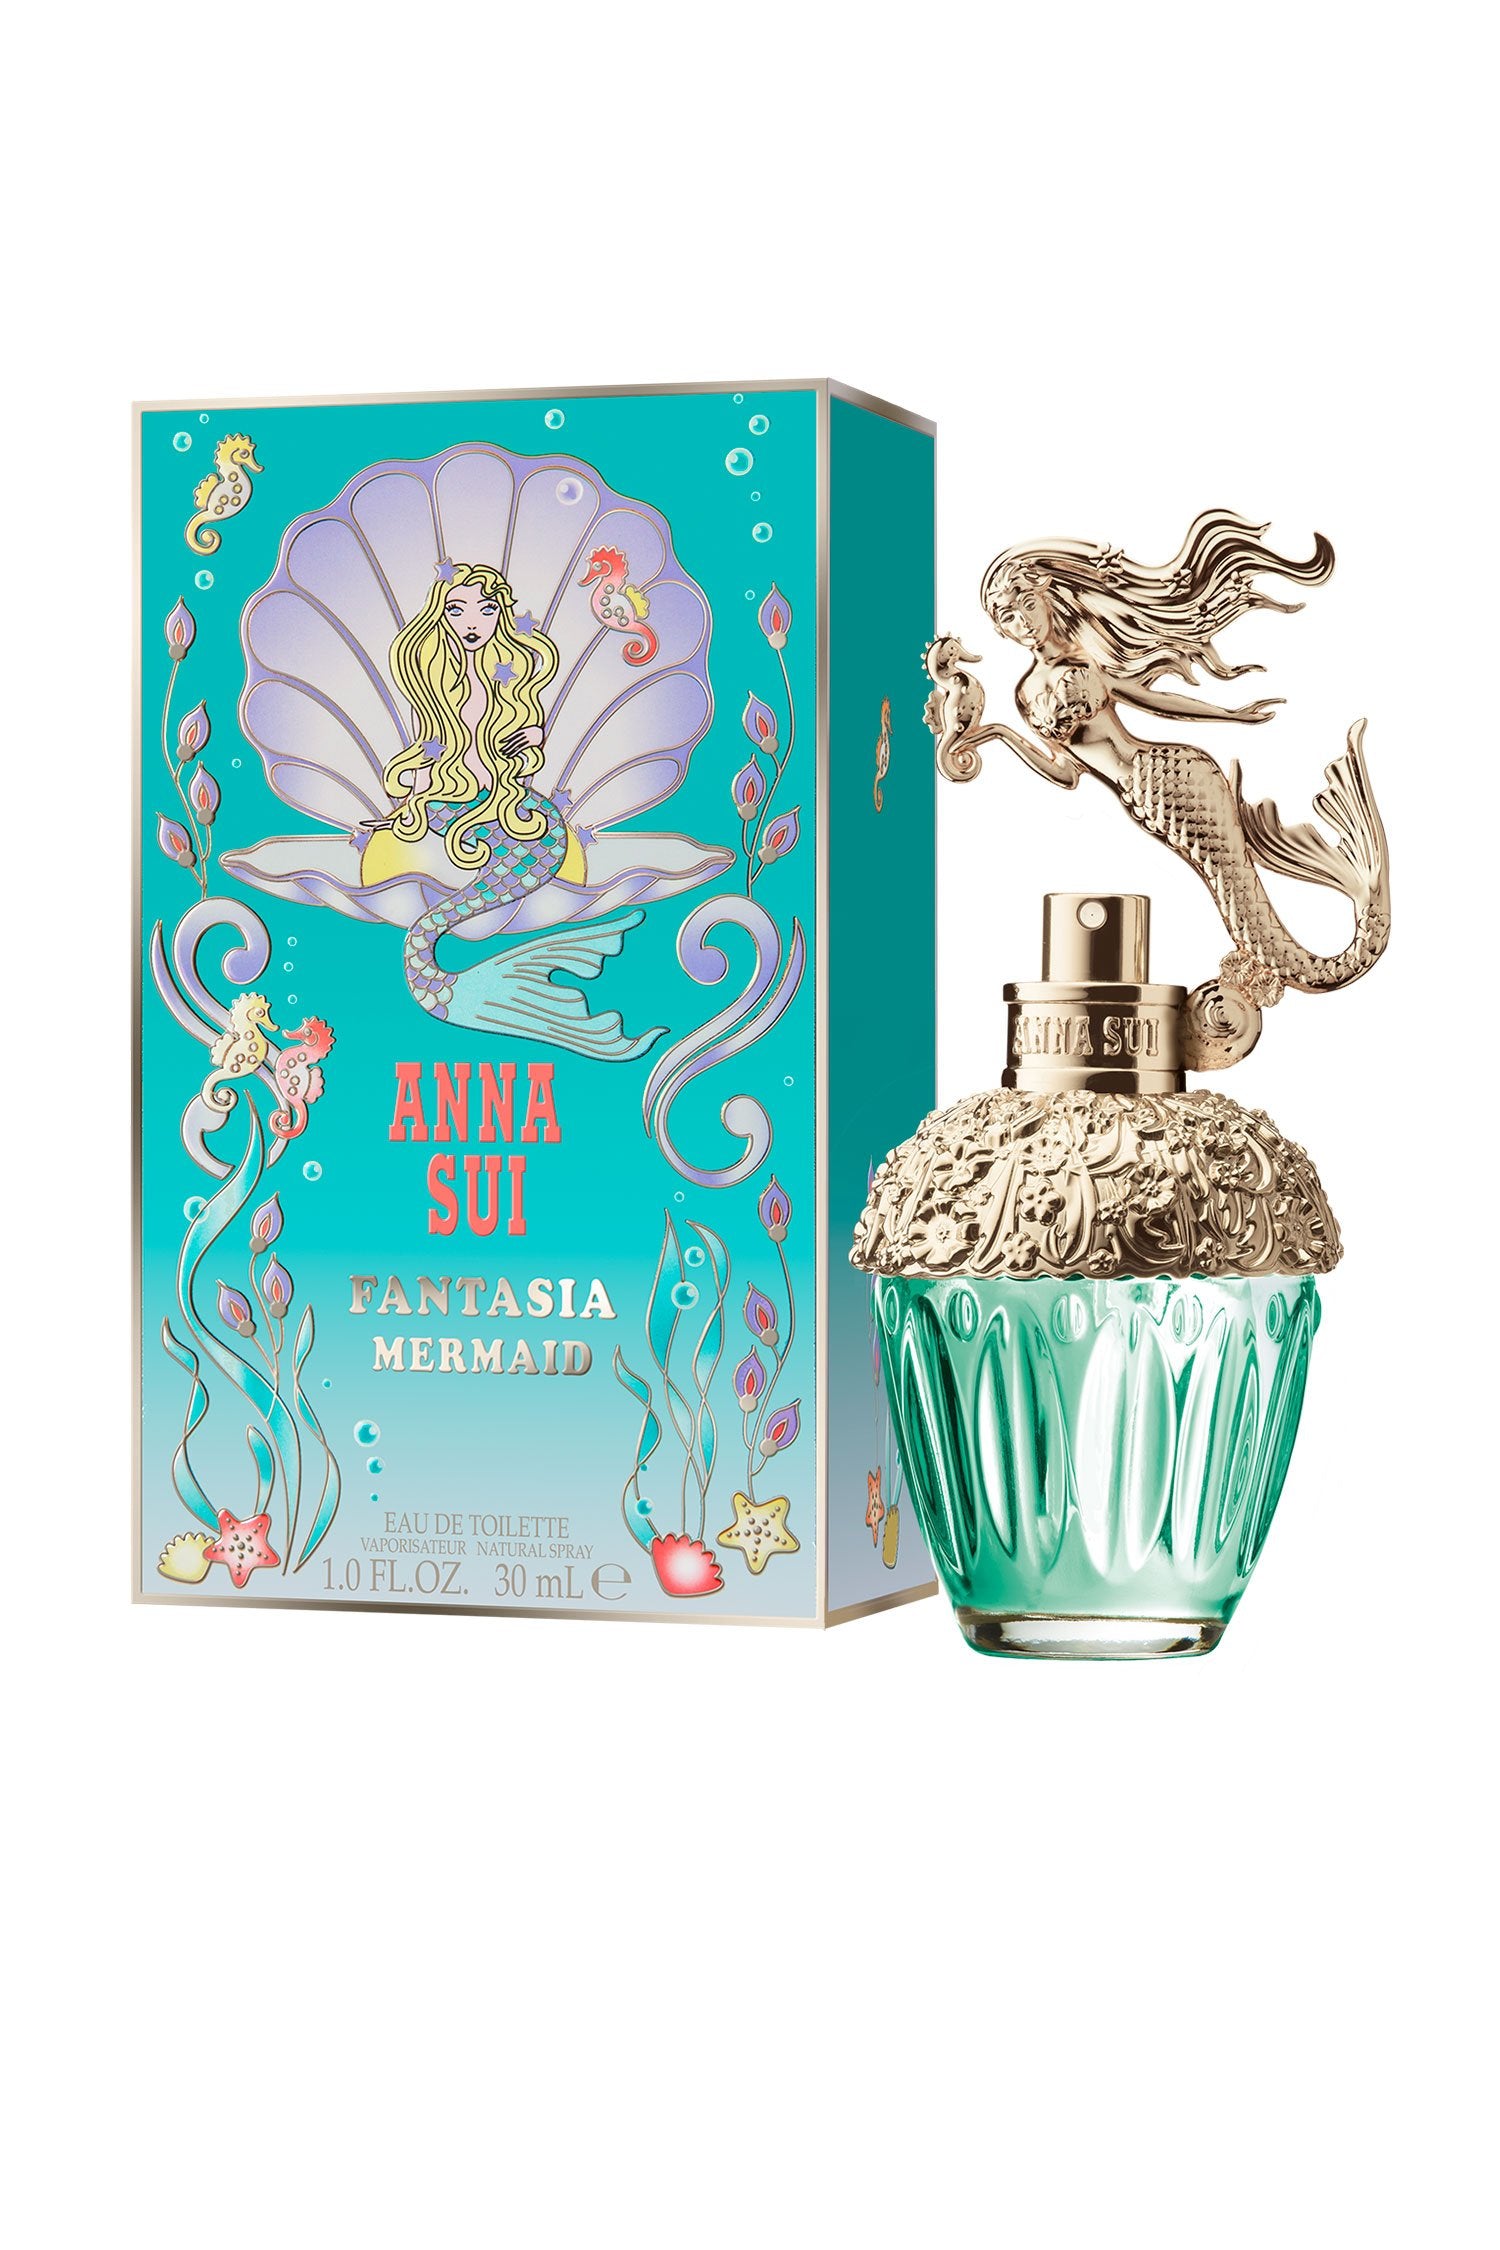 A carefree and sensual scent, Fantasia Mermaid’s aquatic fruity floral notes conjure up mystery, enchantment and adventure